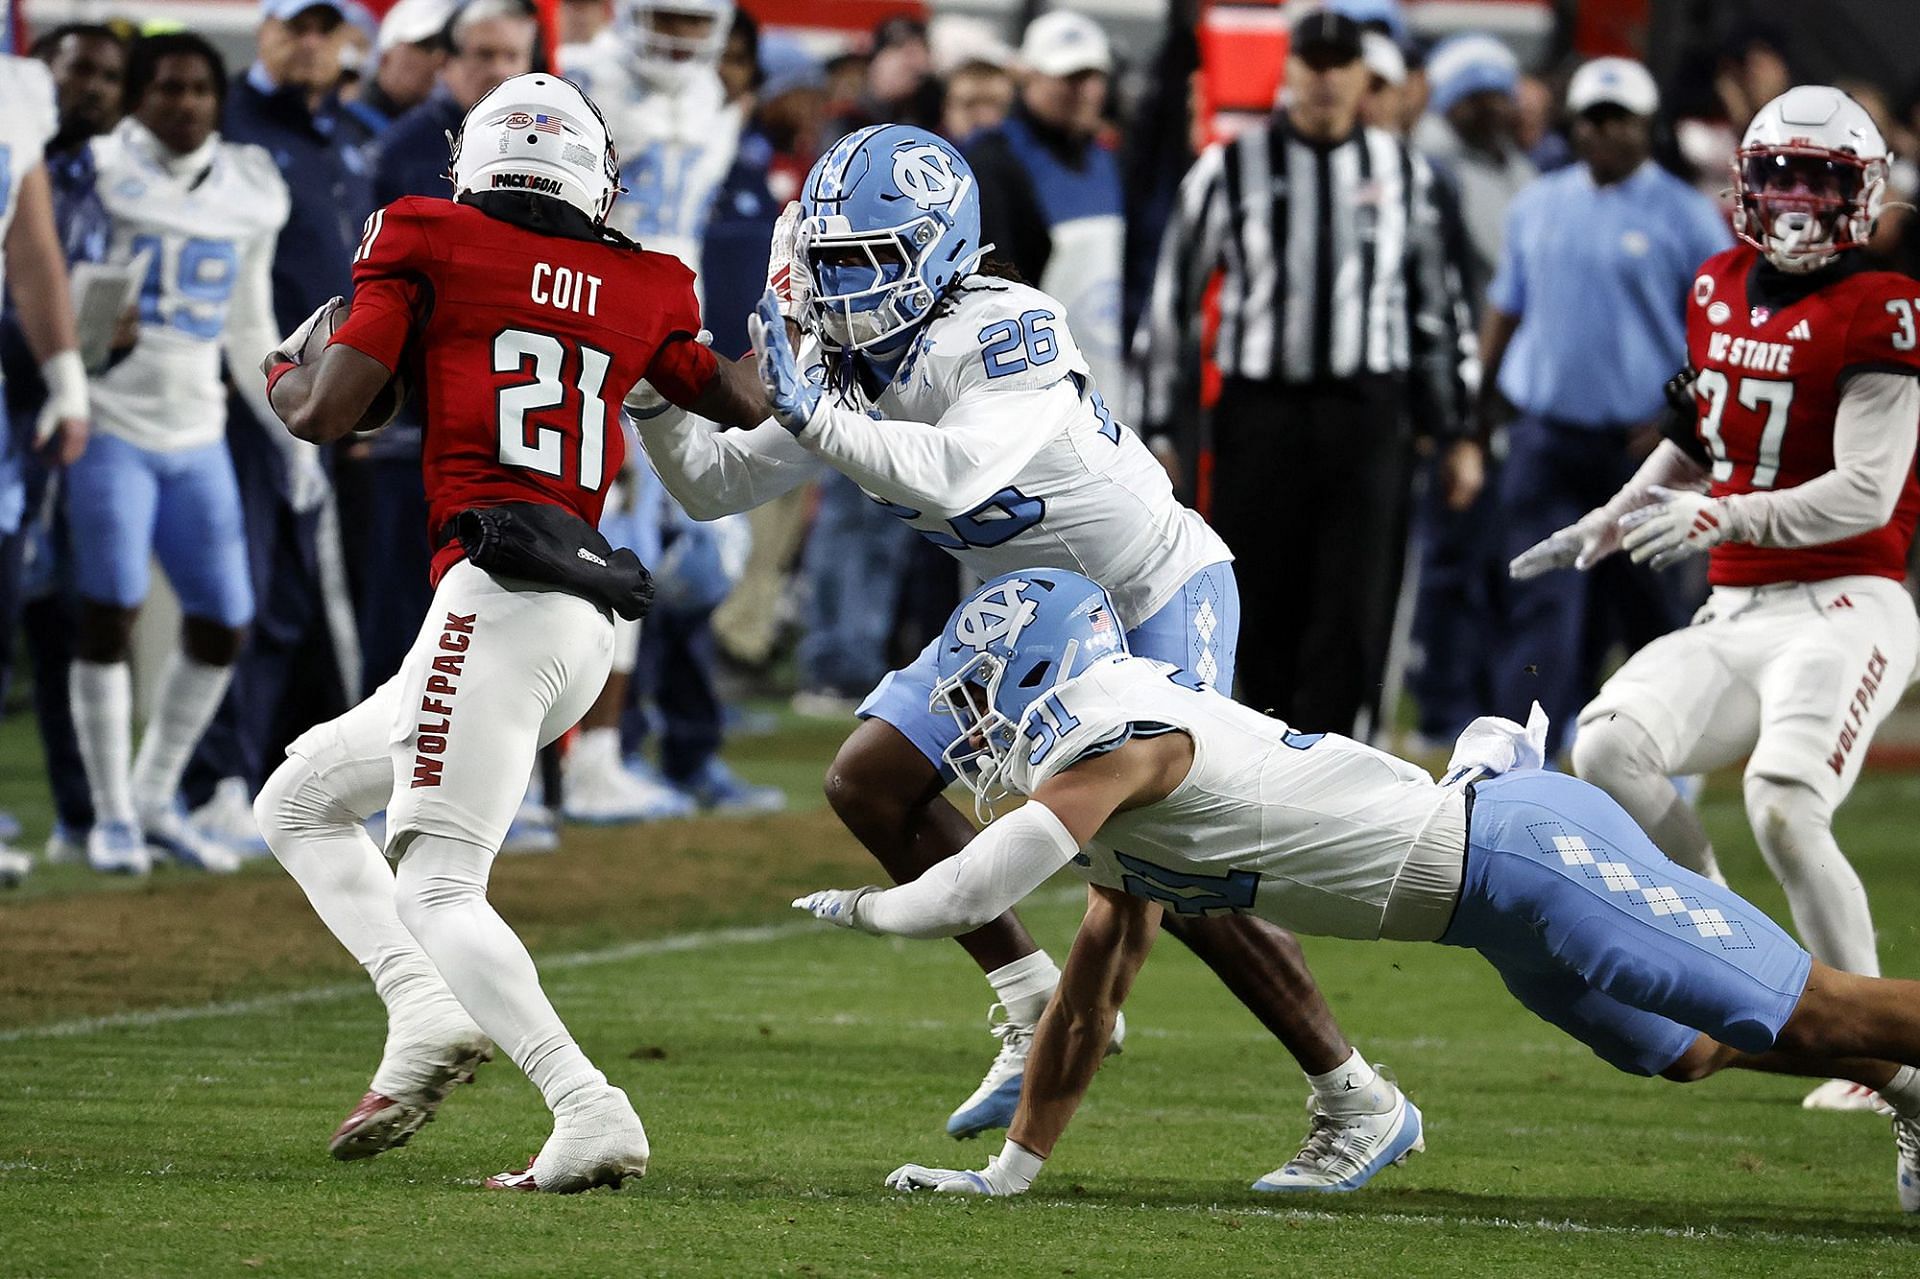 North Carolina State&#039;s Jalen Coit is tackled by North Carolina&#039;s D.J. Jones (26) and Will Hardy in Raleigh, N.C., on Nov. 25. (AP Photo/Karl B DeBlaker)